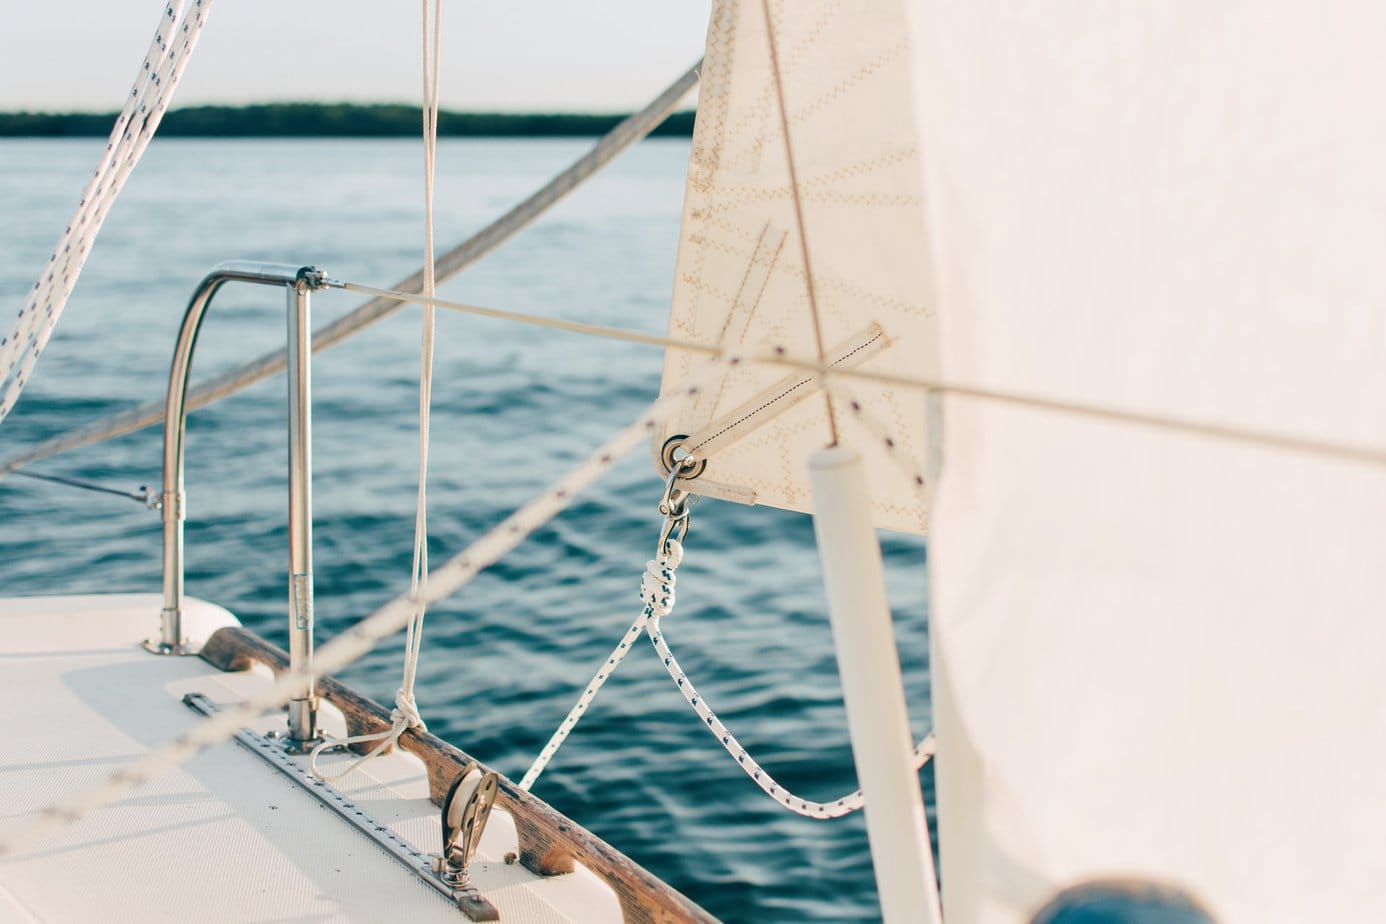 “You yourself rudder, sailor, ship” – what skills are useful for an independent yacht expedition?